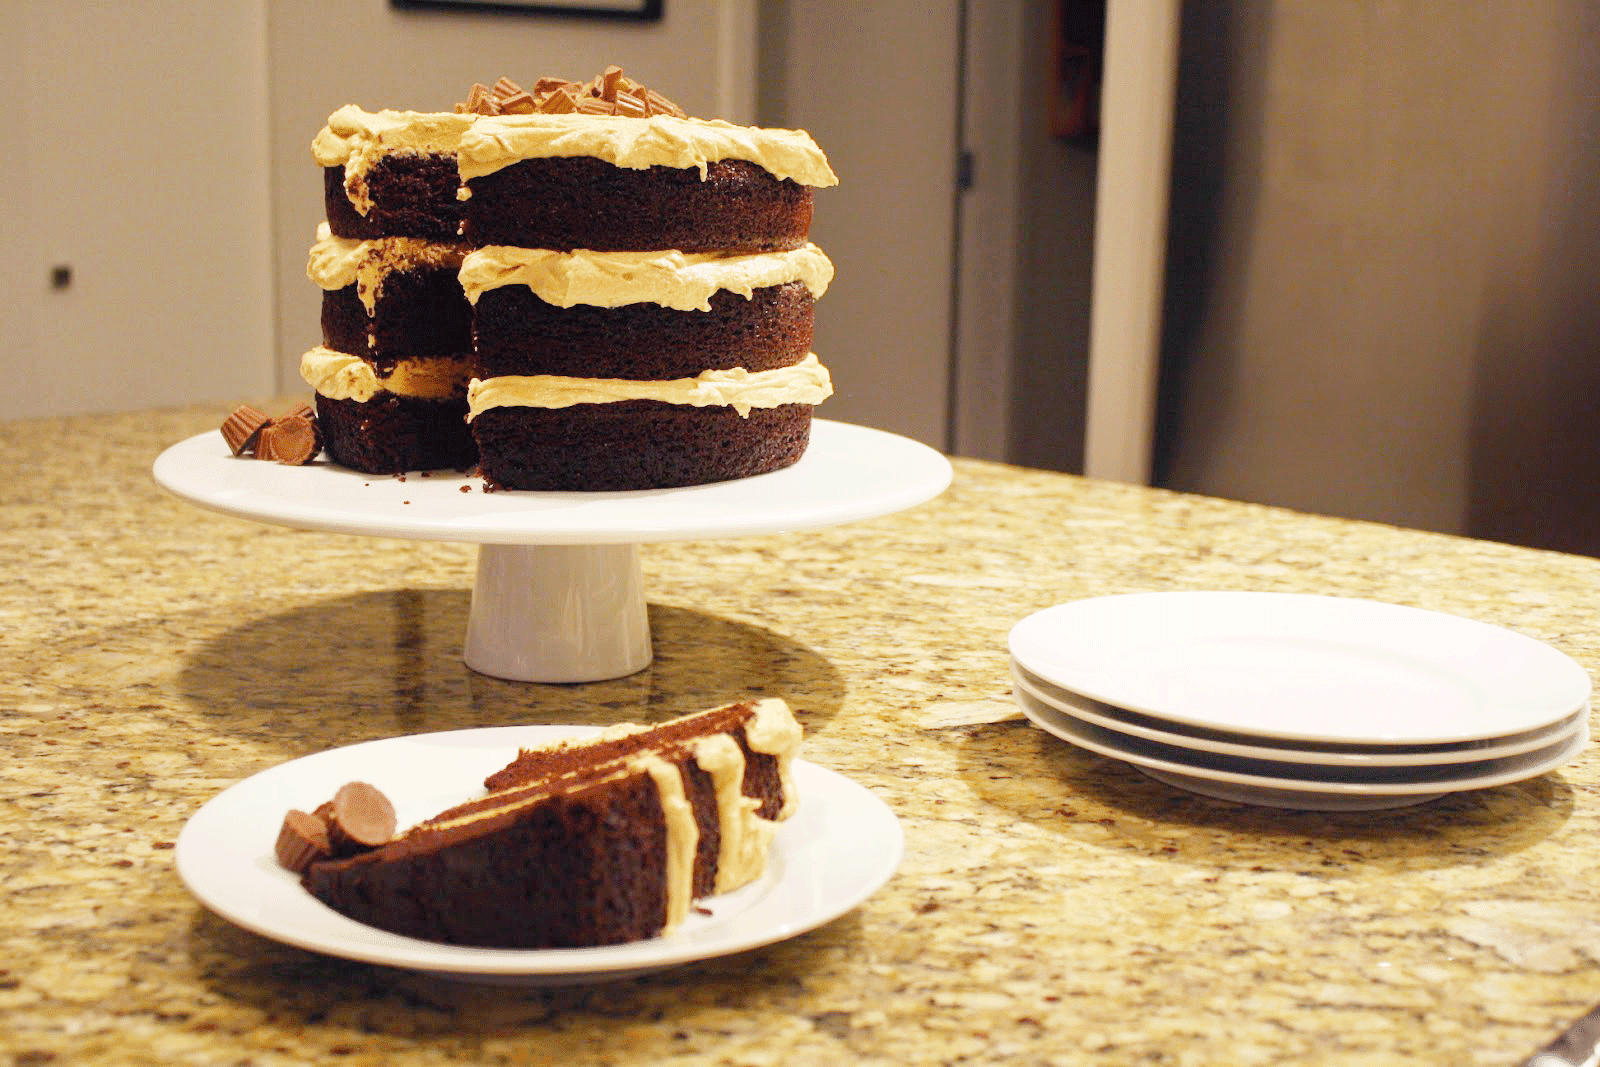 A slice of cake on a plate